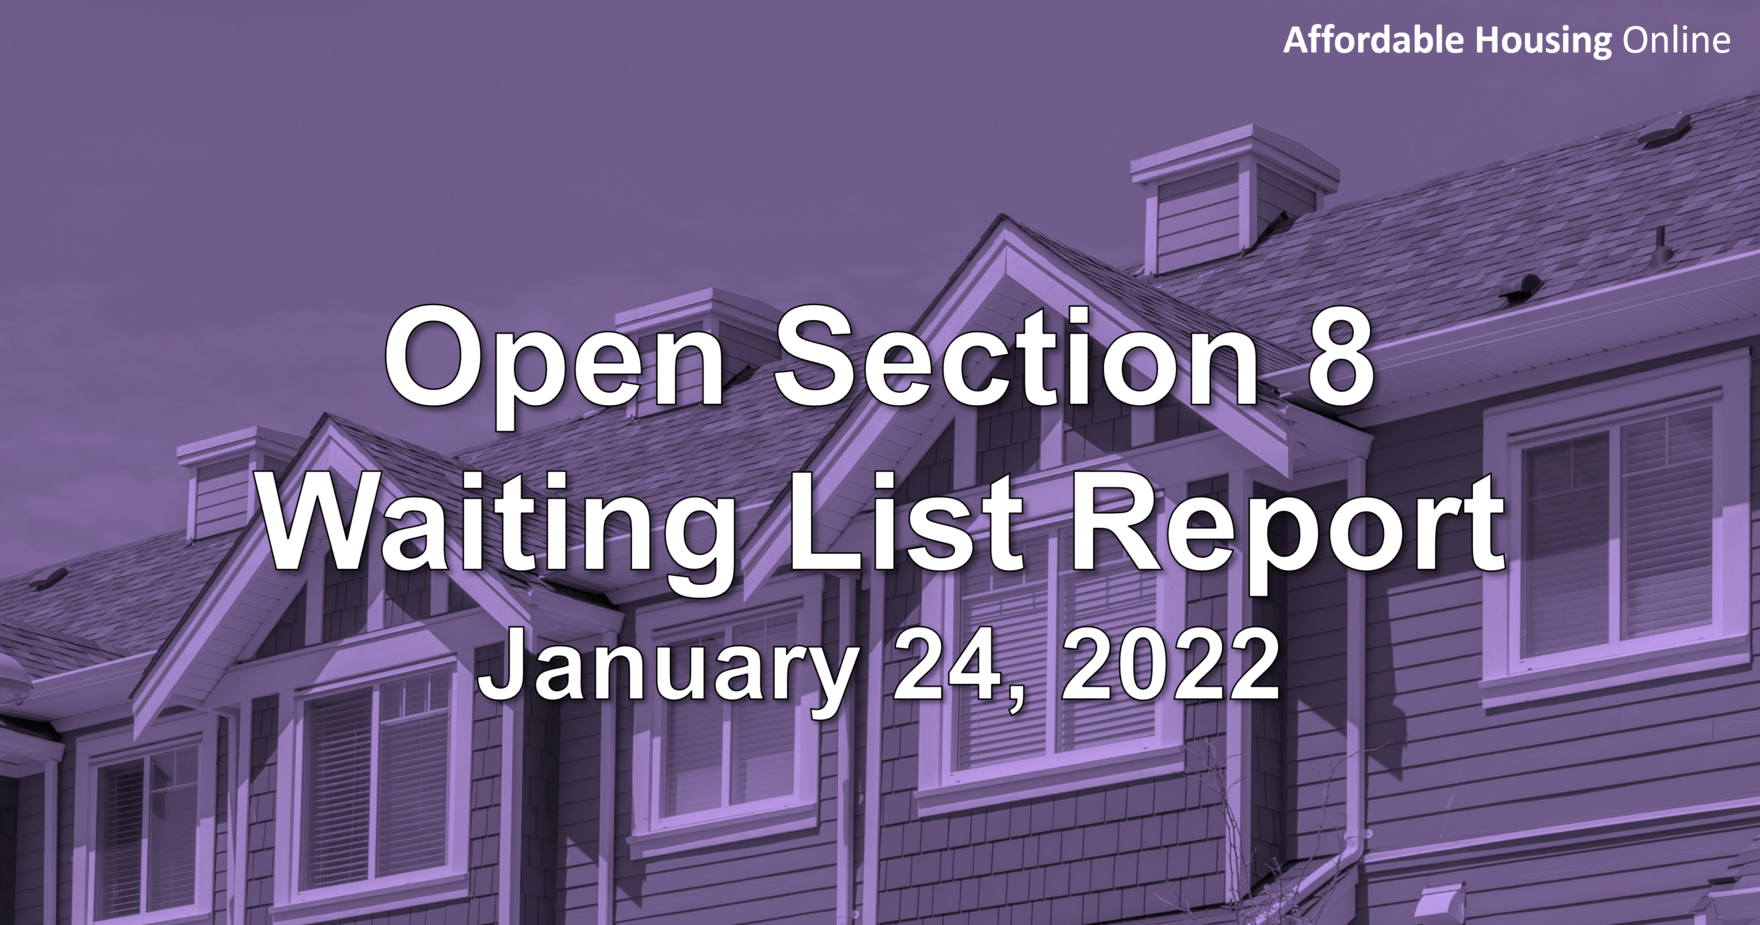 Open Section 8 Waiting List Report Banner image for January 24, 2022